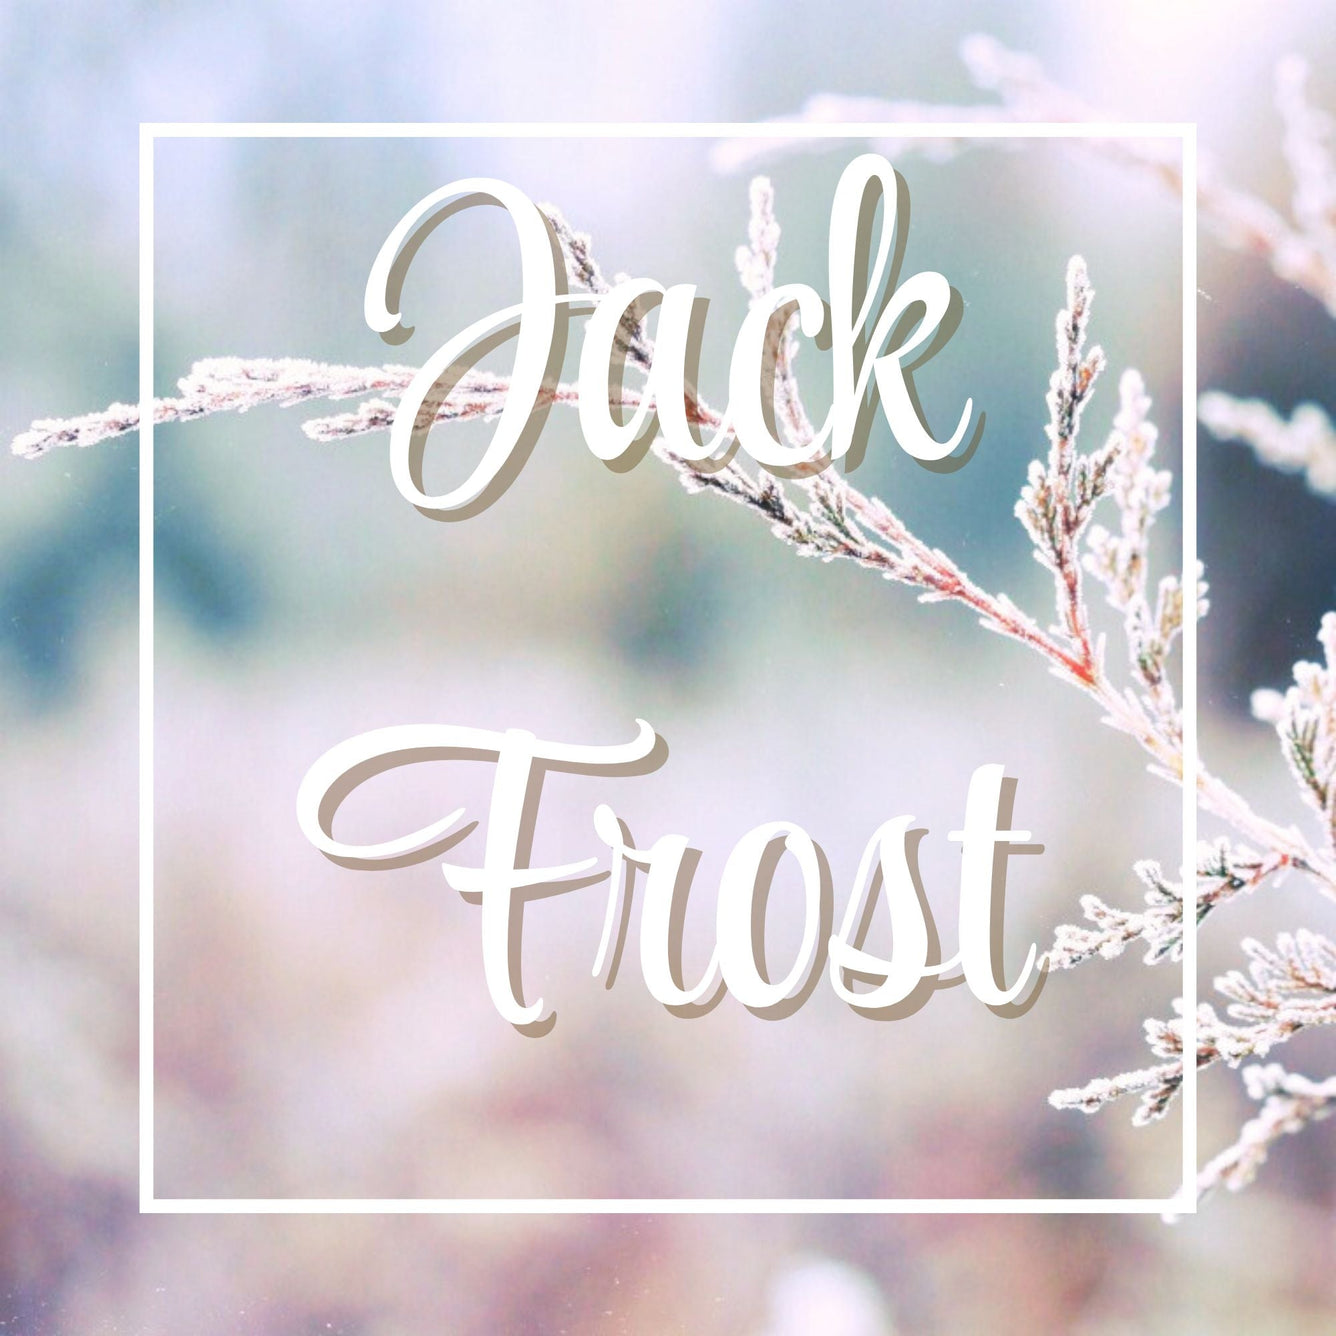 Jack Frost | The Columbia Fragrance Co.